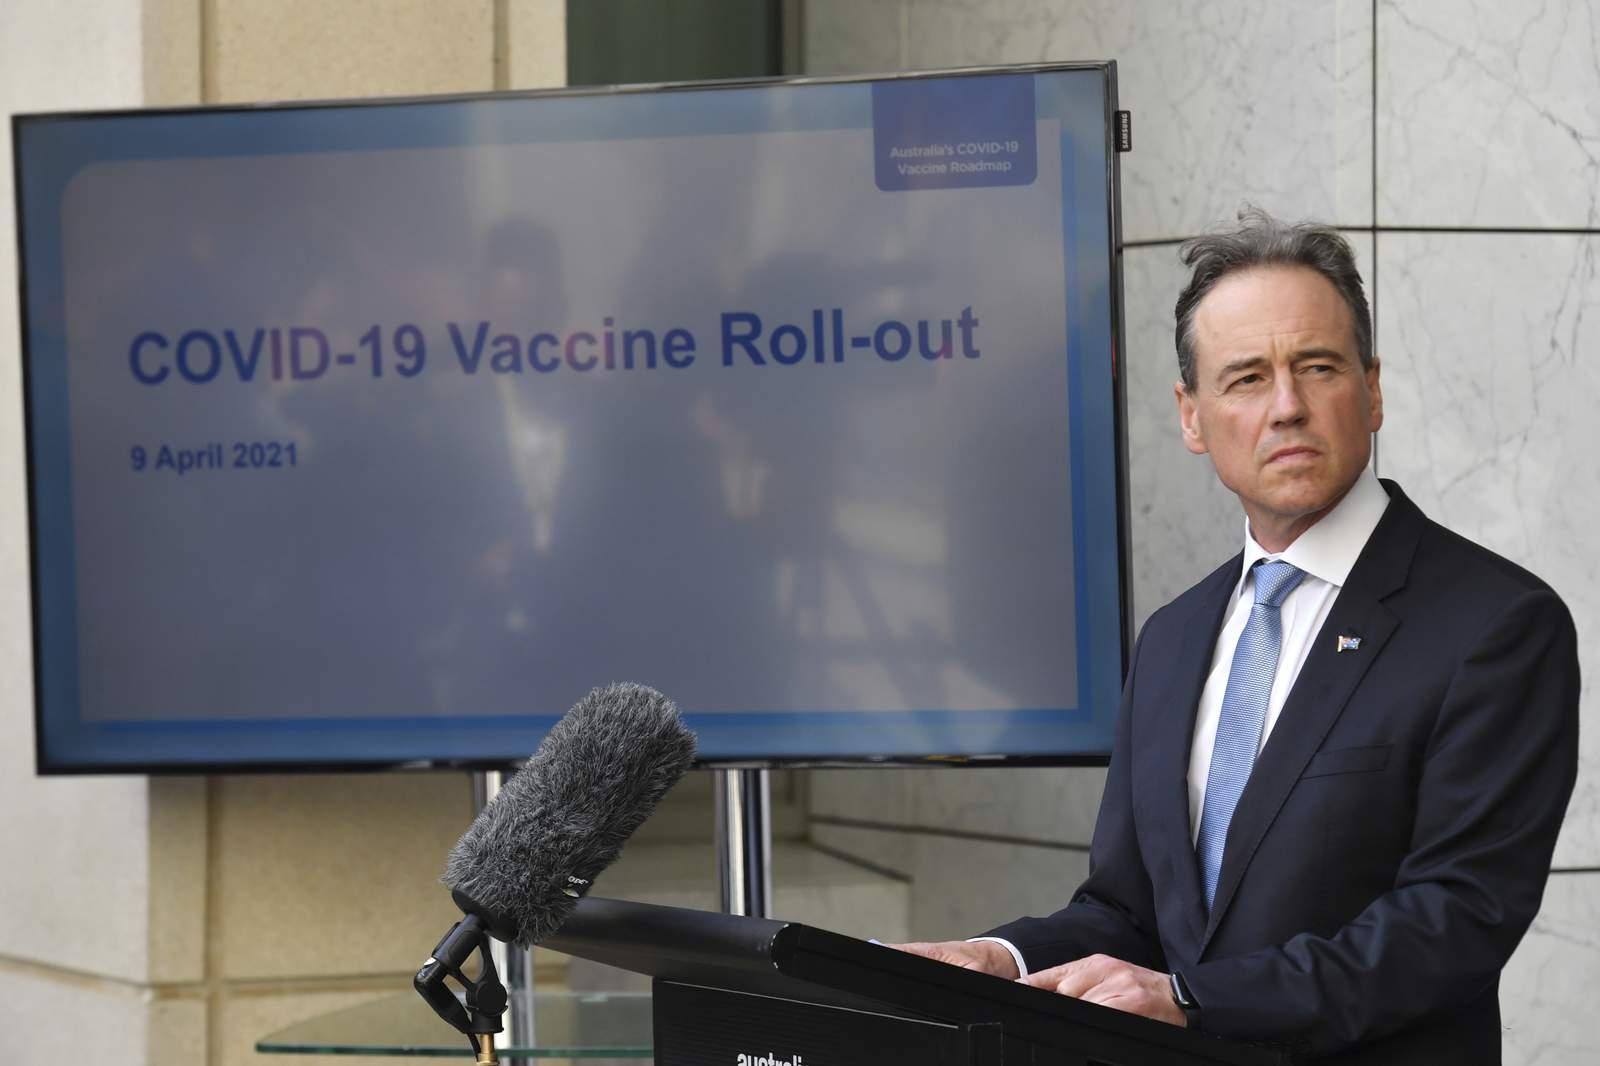 Australia rules out adding J&J vaccine to inoculation plan